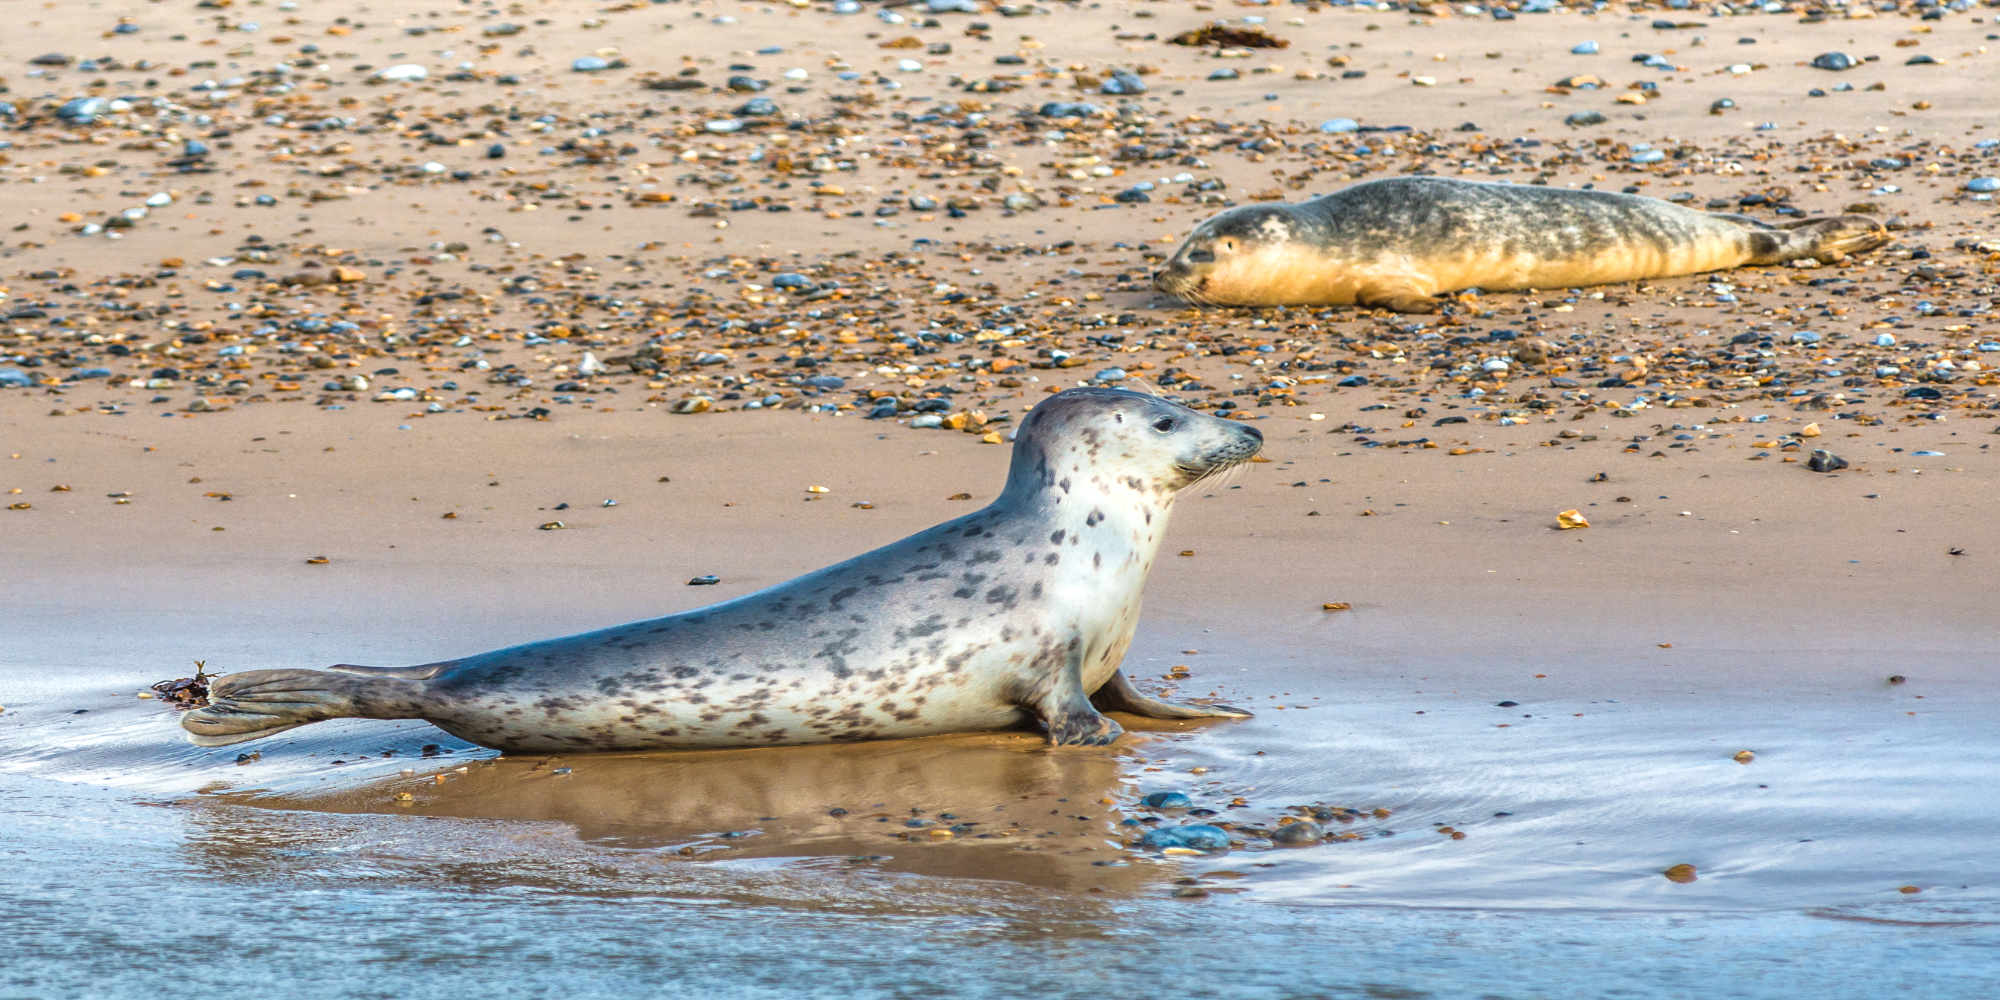 Grey and Common or Harbour Seals